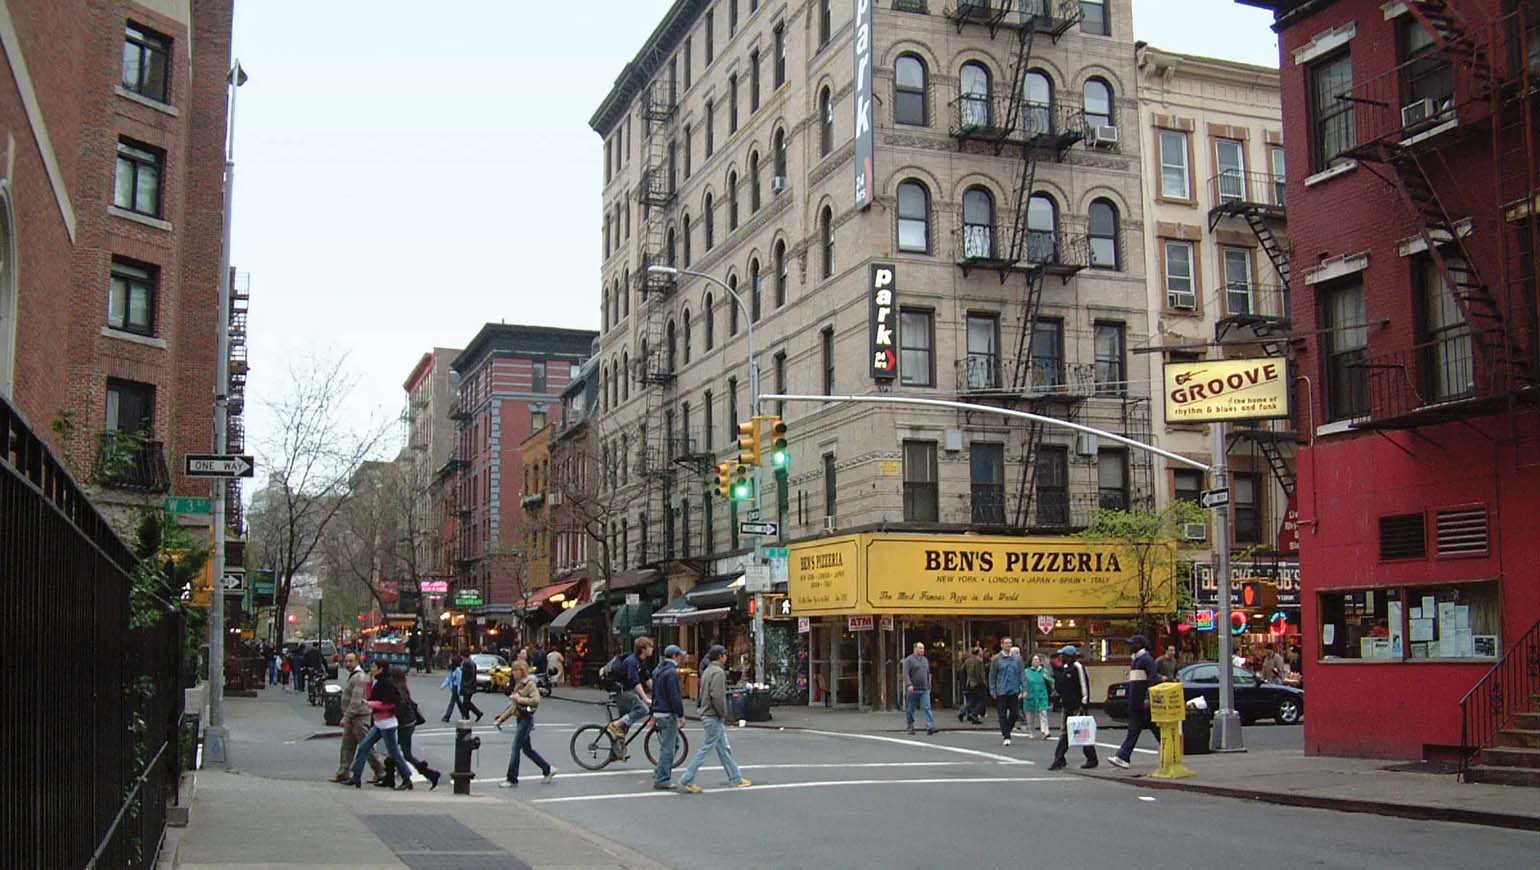 Exploring New York’s Neighborhoods: Local Destinations for Authentic Experiences